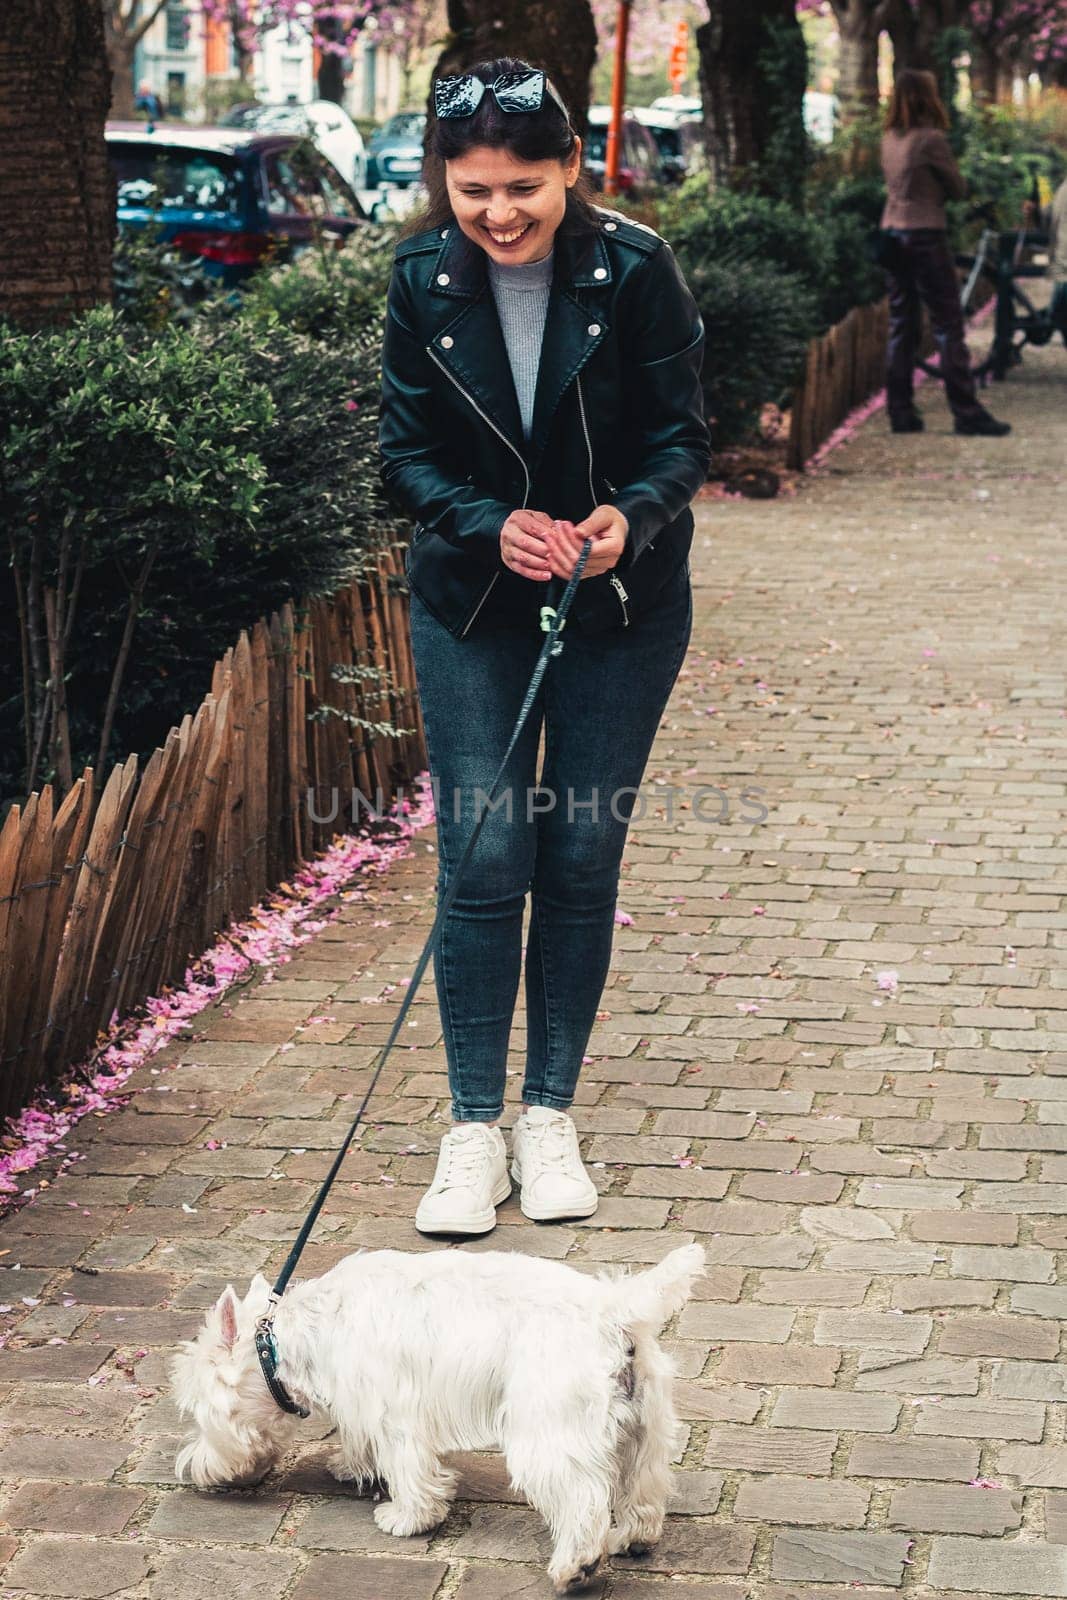 Portrait of one young beautiful caucasian girl in a leather jacket with a smile walks and has fun with a white dog on a leash on a city street against the backdrop of flowering sakura trees, close-up side view.